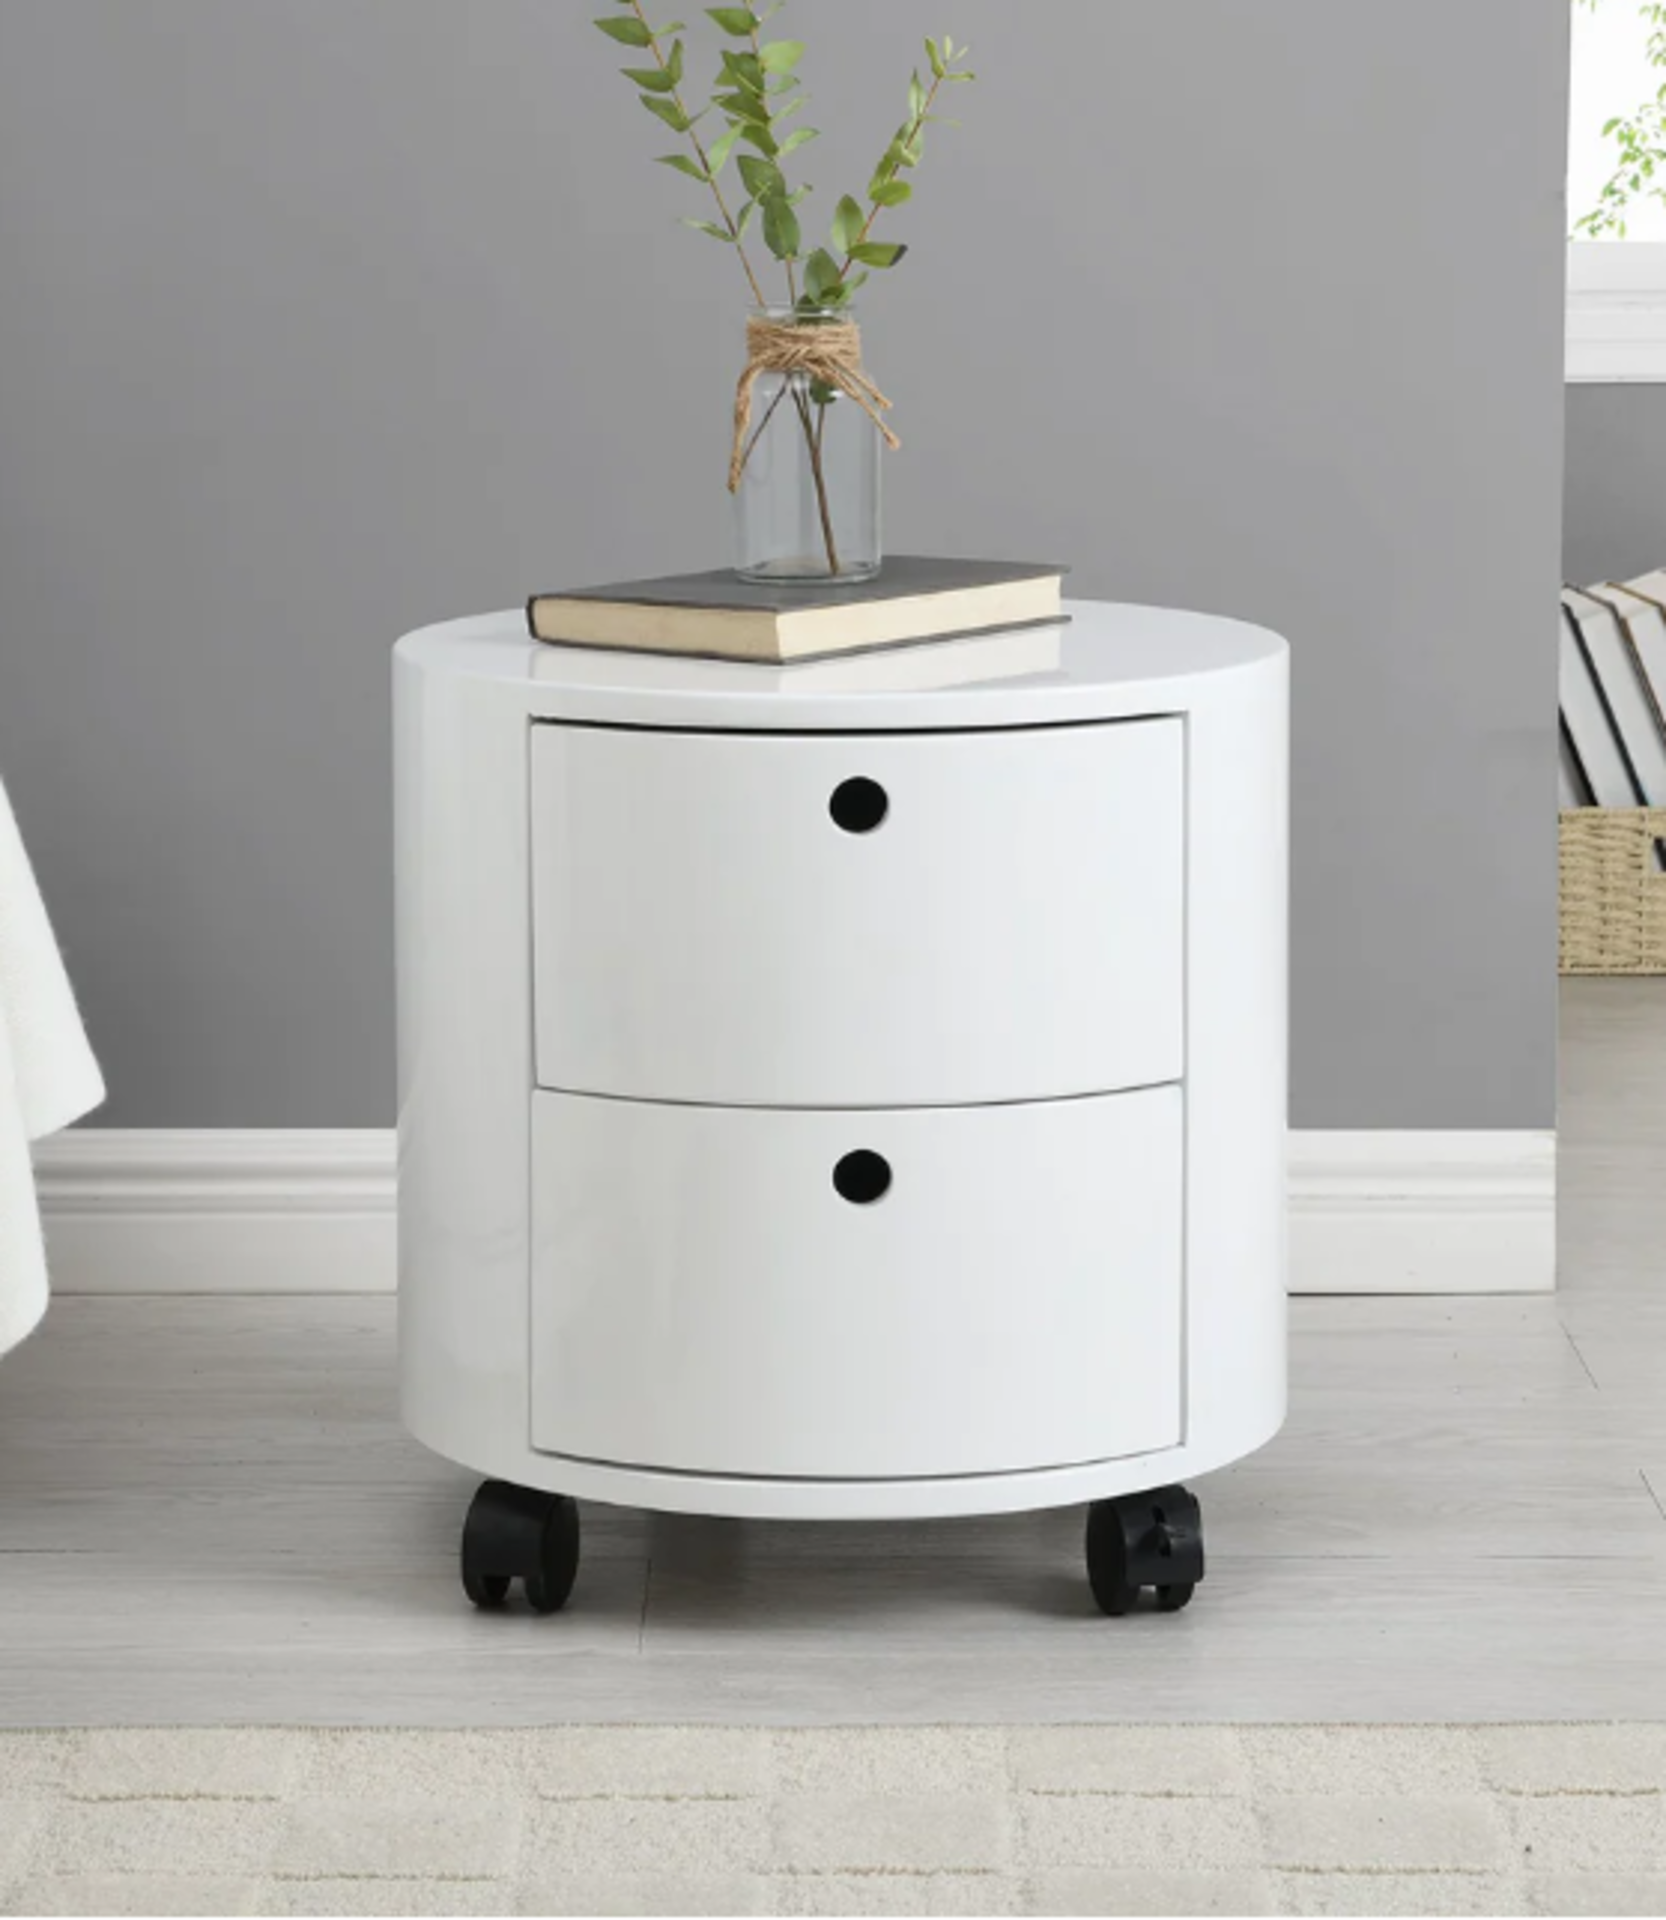 DOLIO Drum Chest Bedside Table, Barrel Side Table with Drawers High Gloss White 2 Drawer. - SR6. RRP